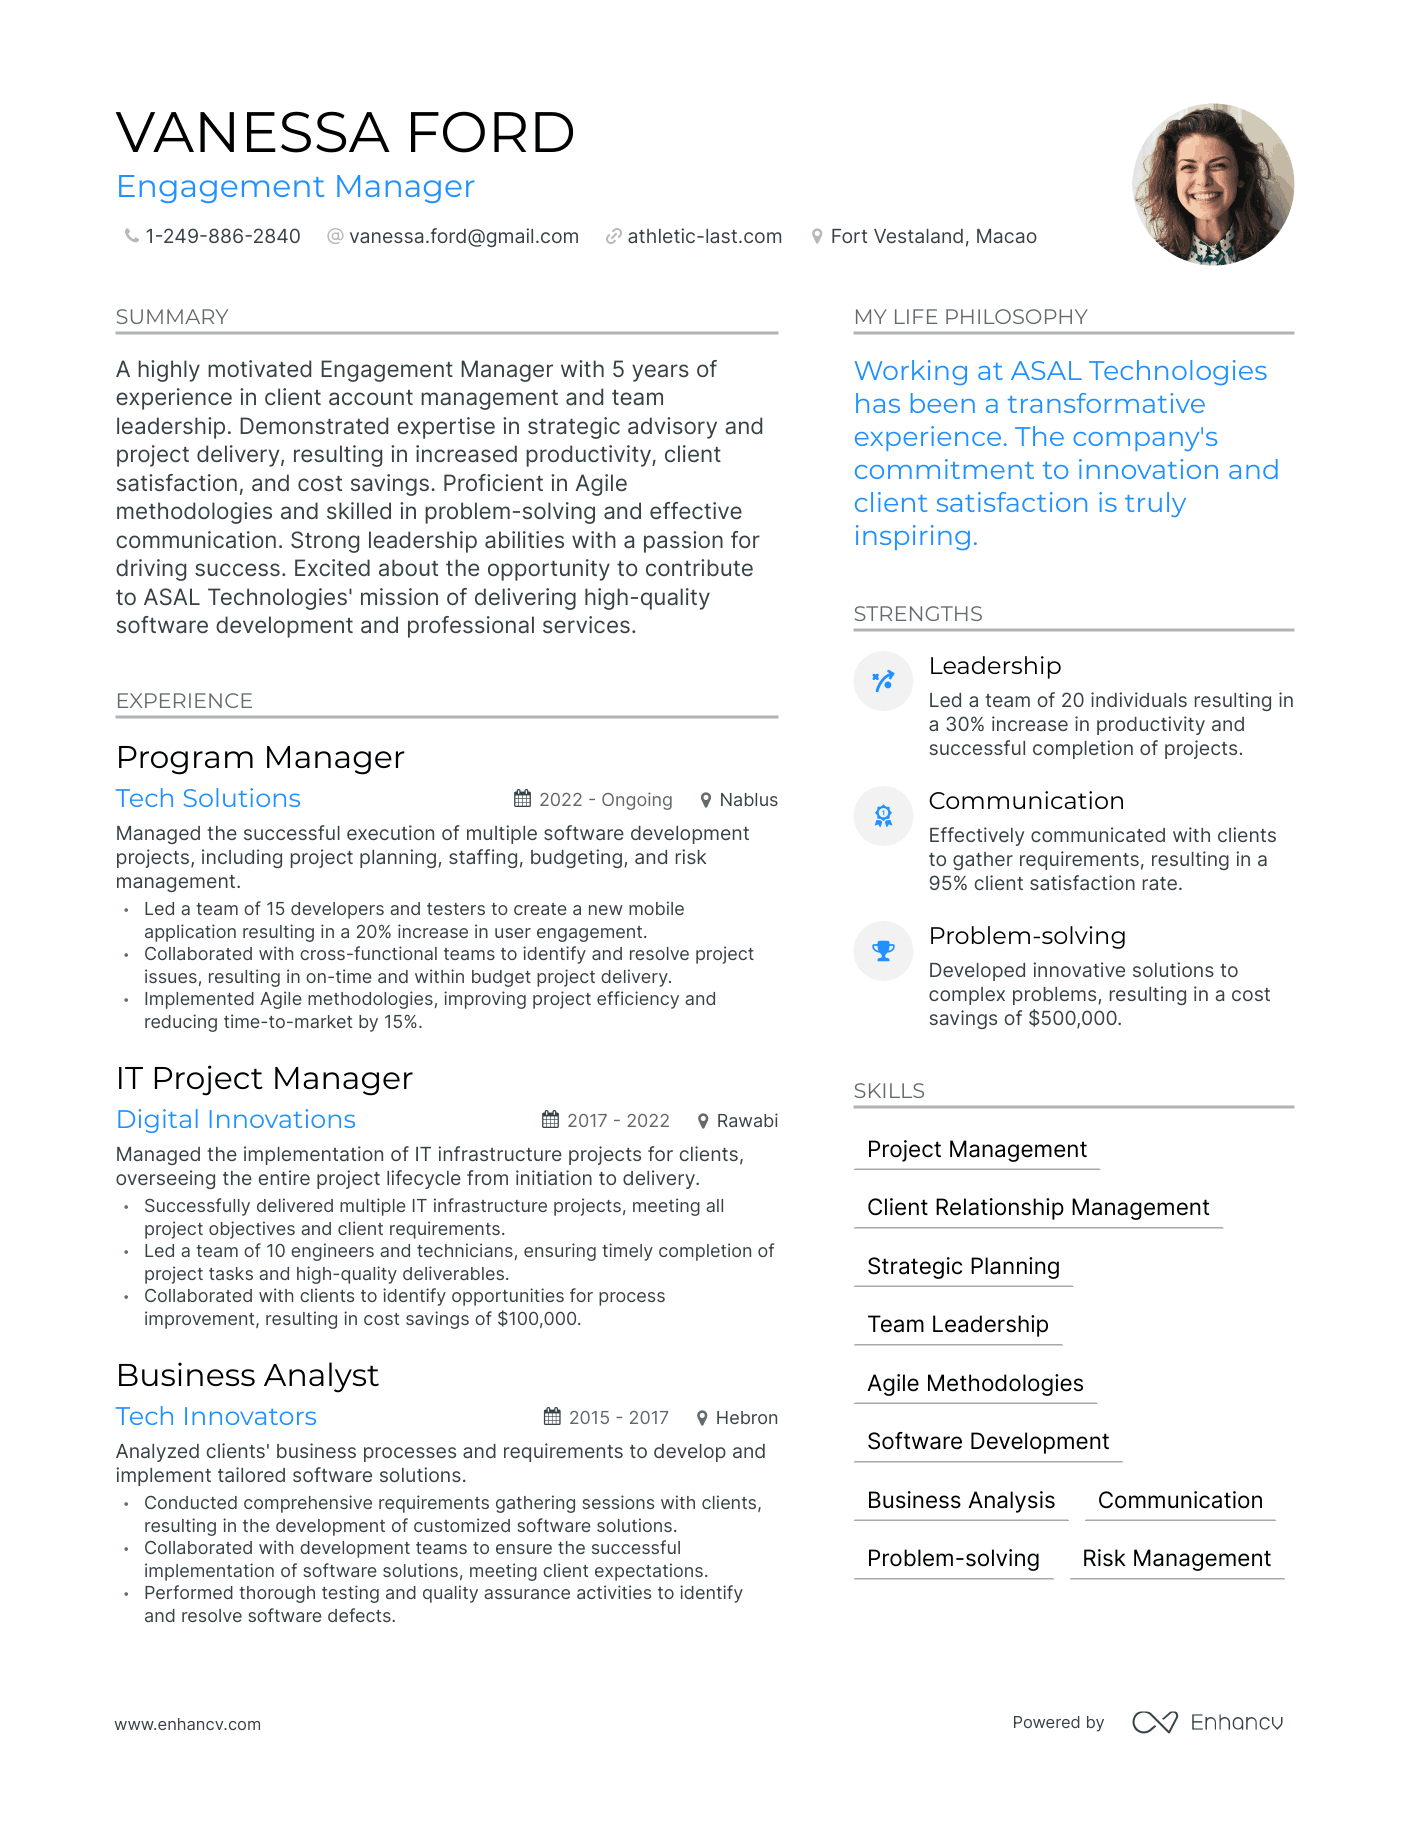 Modern Engagement Manager Resume Example